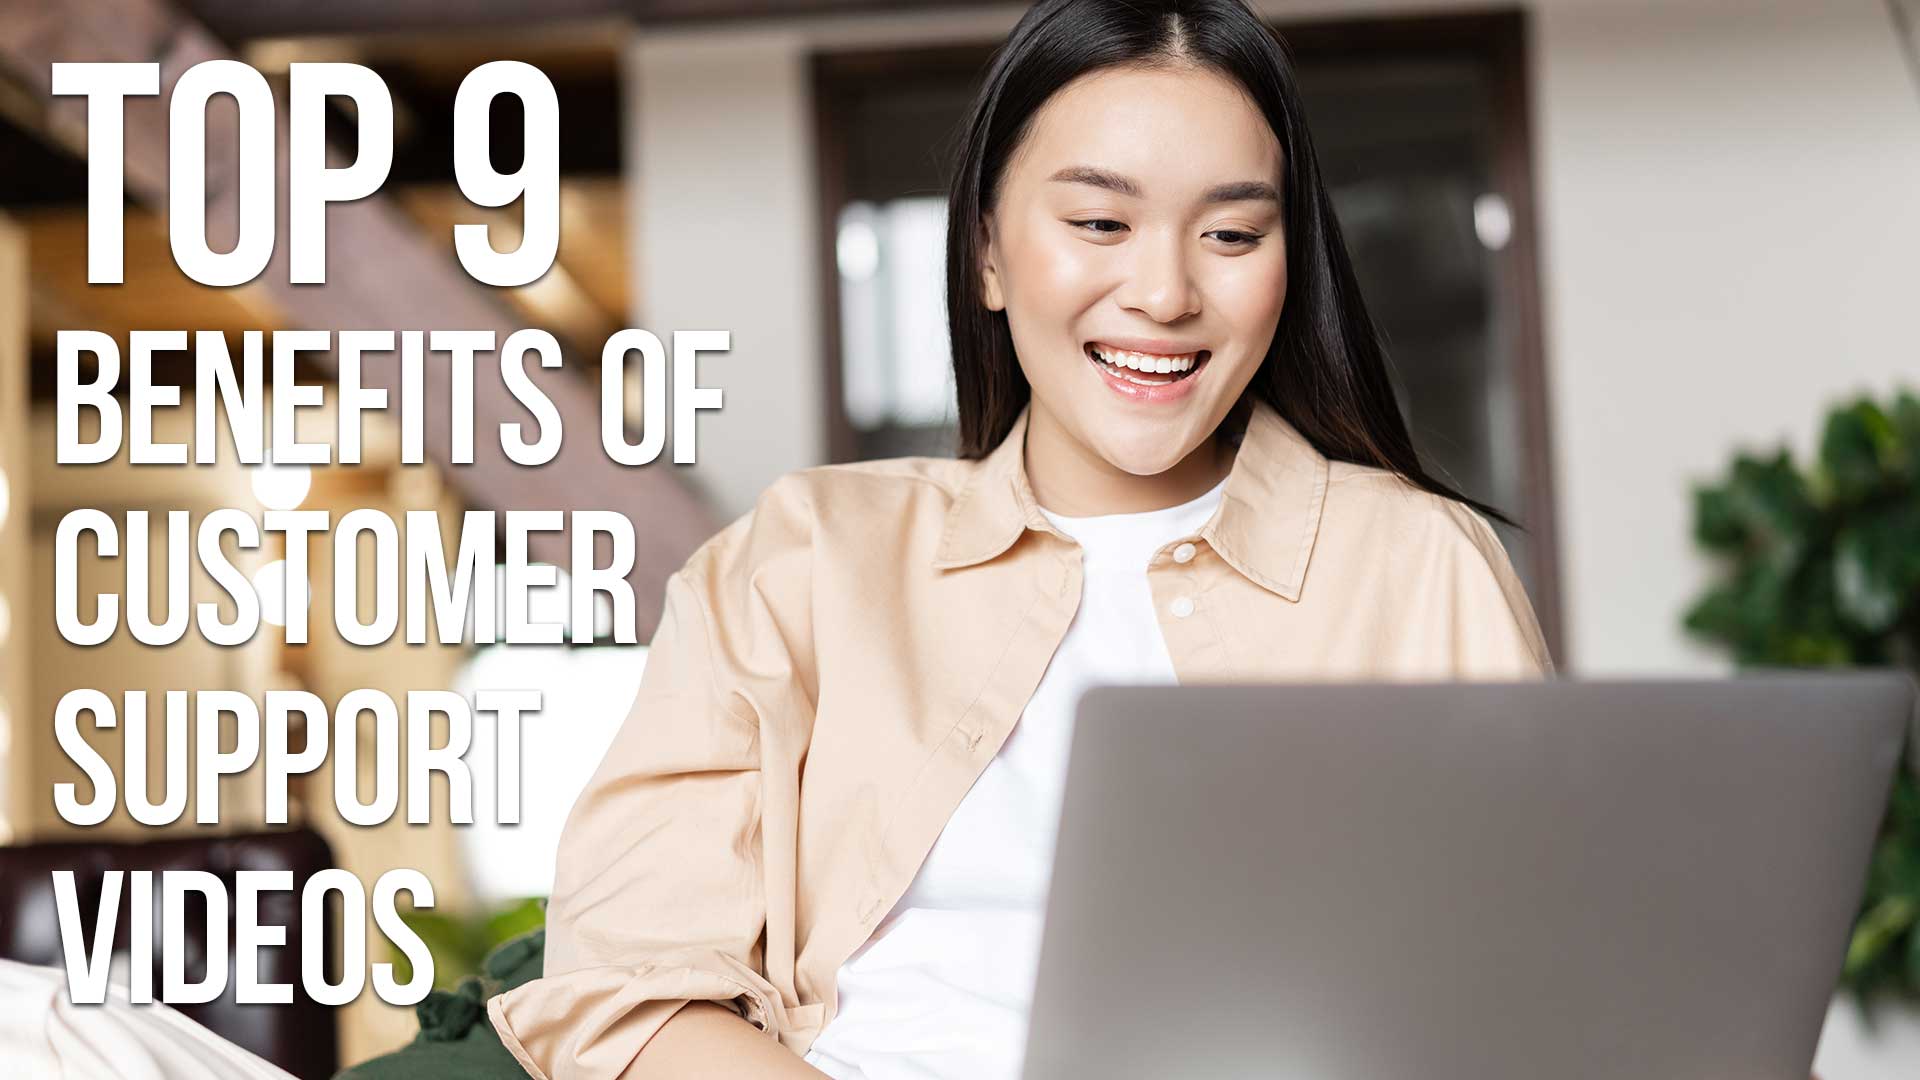 Top 9 Benefits of Customer Support Videos